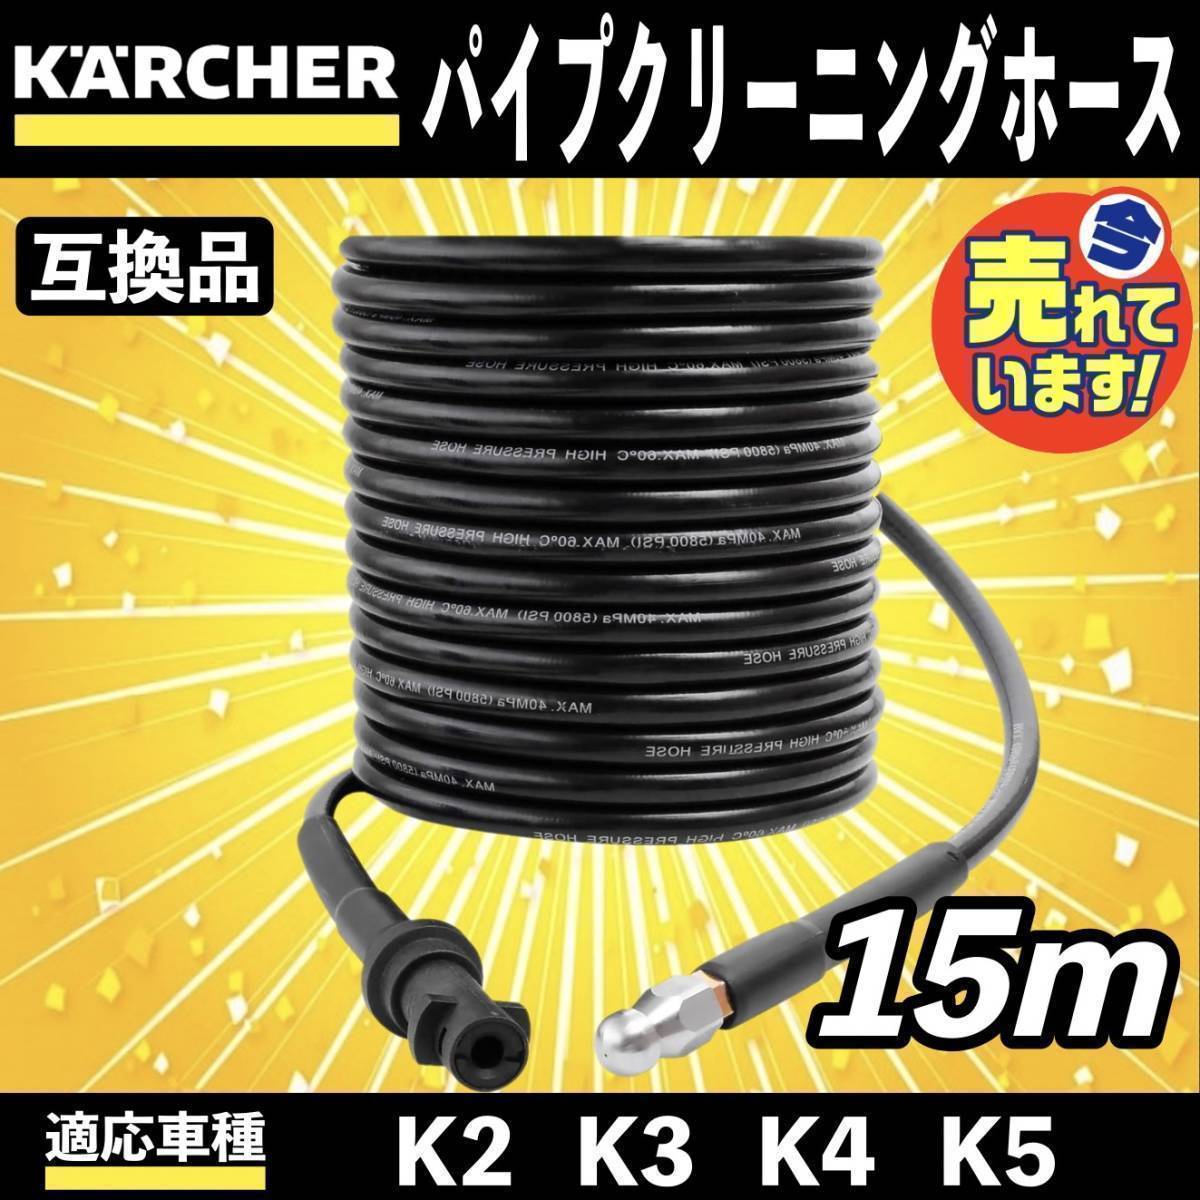 15m Karcher high pressure washer for pipe cleaning hose extension height pressure hose drainage tube piping washing KERCHER K series K2 K3 K4 K5 K6 K7 c